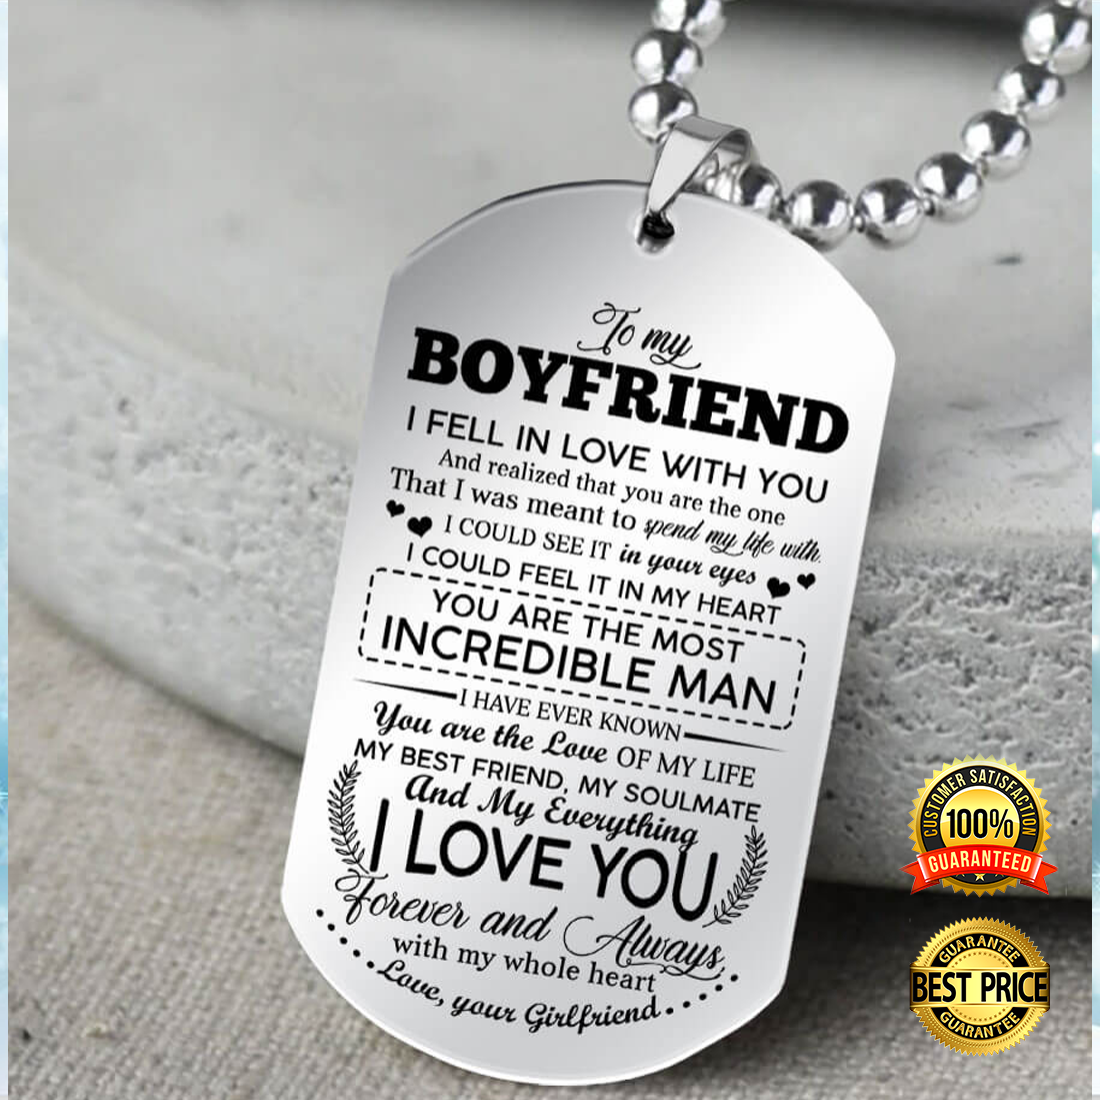 To my boyfriend i fell in love with you dog tag